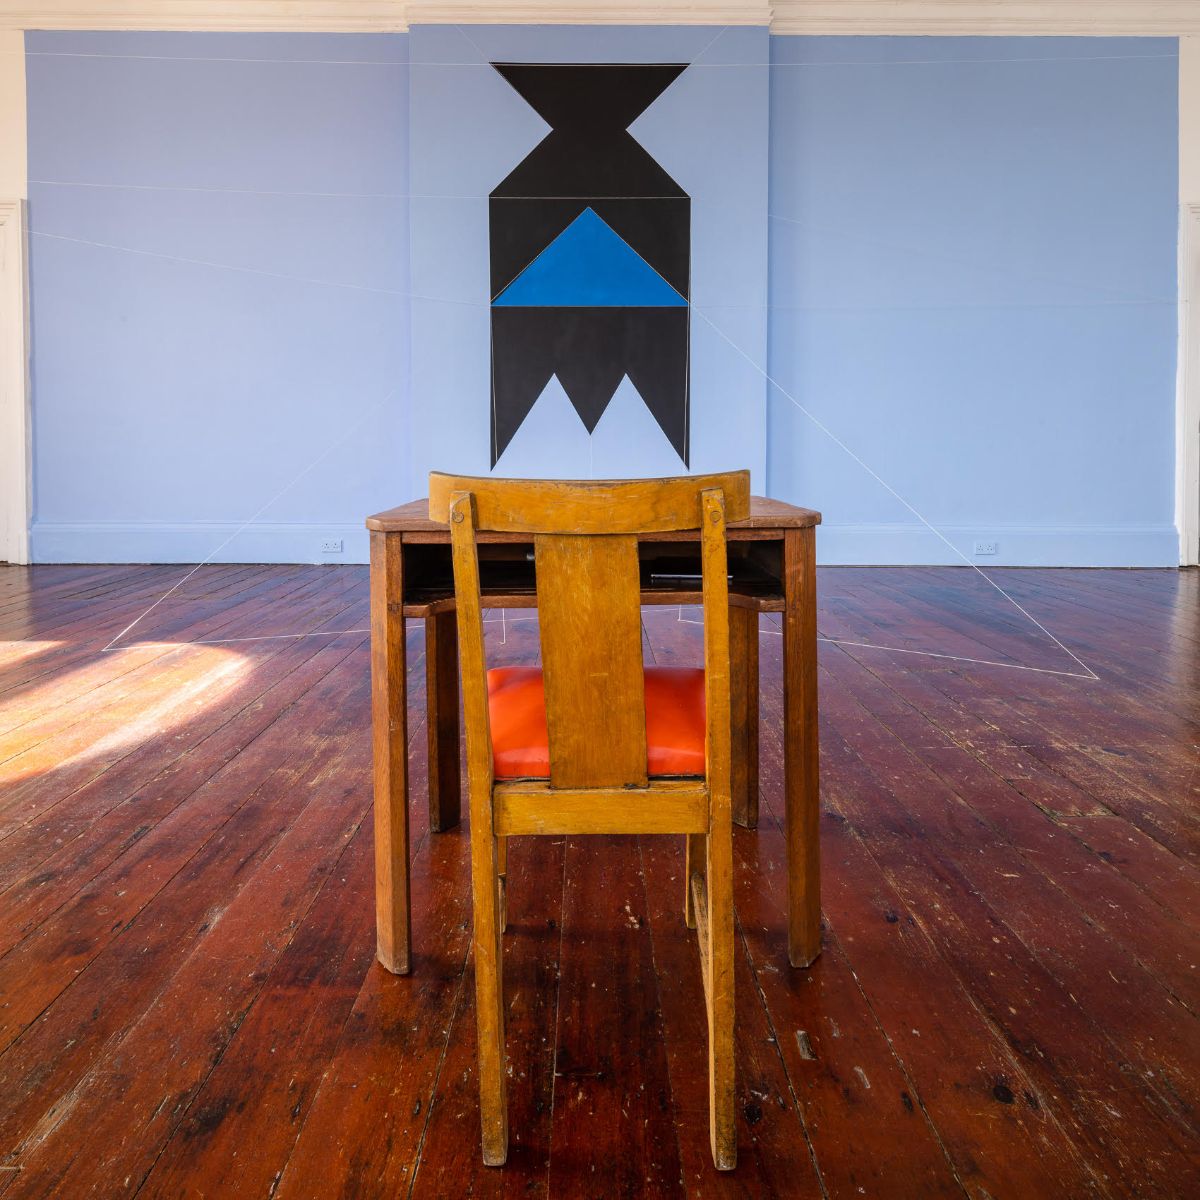 View of Patrick Ireland, aka Brian O'Doherty, HCE Redux, 2004 (remade 2023), SIRIUS, 2023. Paint, cord, table, chair, typed paper. Dimensions variable. Courtesy of The Estate of Brian O’Doherty. Photograph: John Beasley | SIRIUS Summer School: Brian O’Doherty: Reading Time | Tuesday 6 June – Saturday 10 June 2023 | SIRIUS | Image: View of Patrick Ireland, aka Brian O'Doherty, HCE Redux, 2004 (remade 2023), SIRIUS, 2023. Paint, cord, table, chair, typed paper. Dimensions variable. Courtesy of The Estate of Brian O’Doherty. Photograph: John Beasley – in a large room: in the foreground a the back of a chair at a small table, both wooden; on the wall some 5 metres (?) further into the room, a geometrical pattern on the pale-blue wall; some strings link the pattern to the floor 